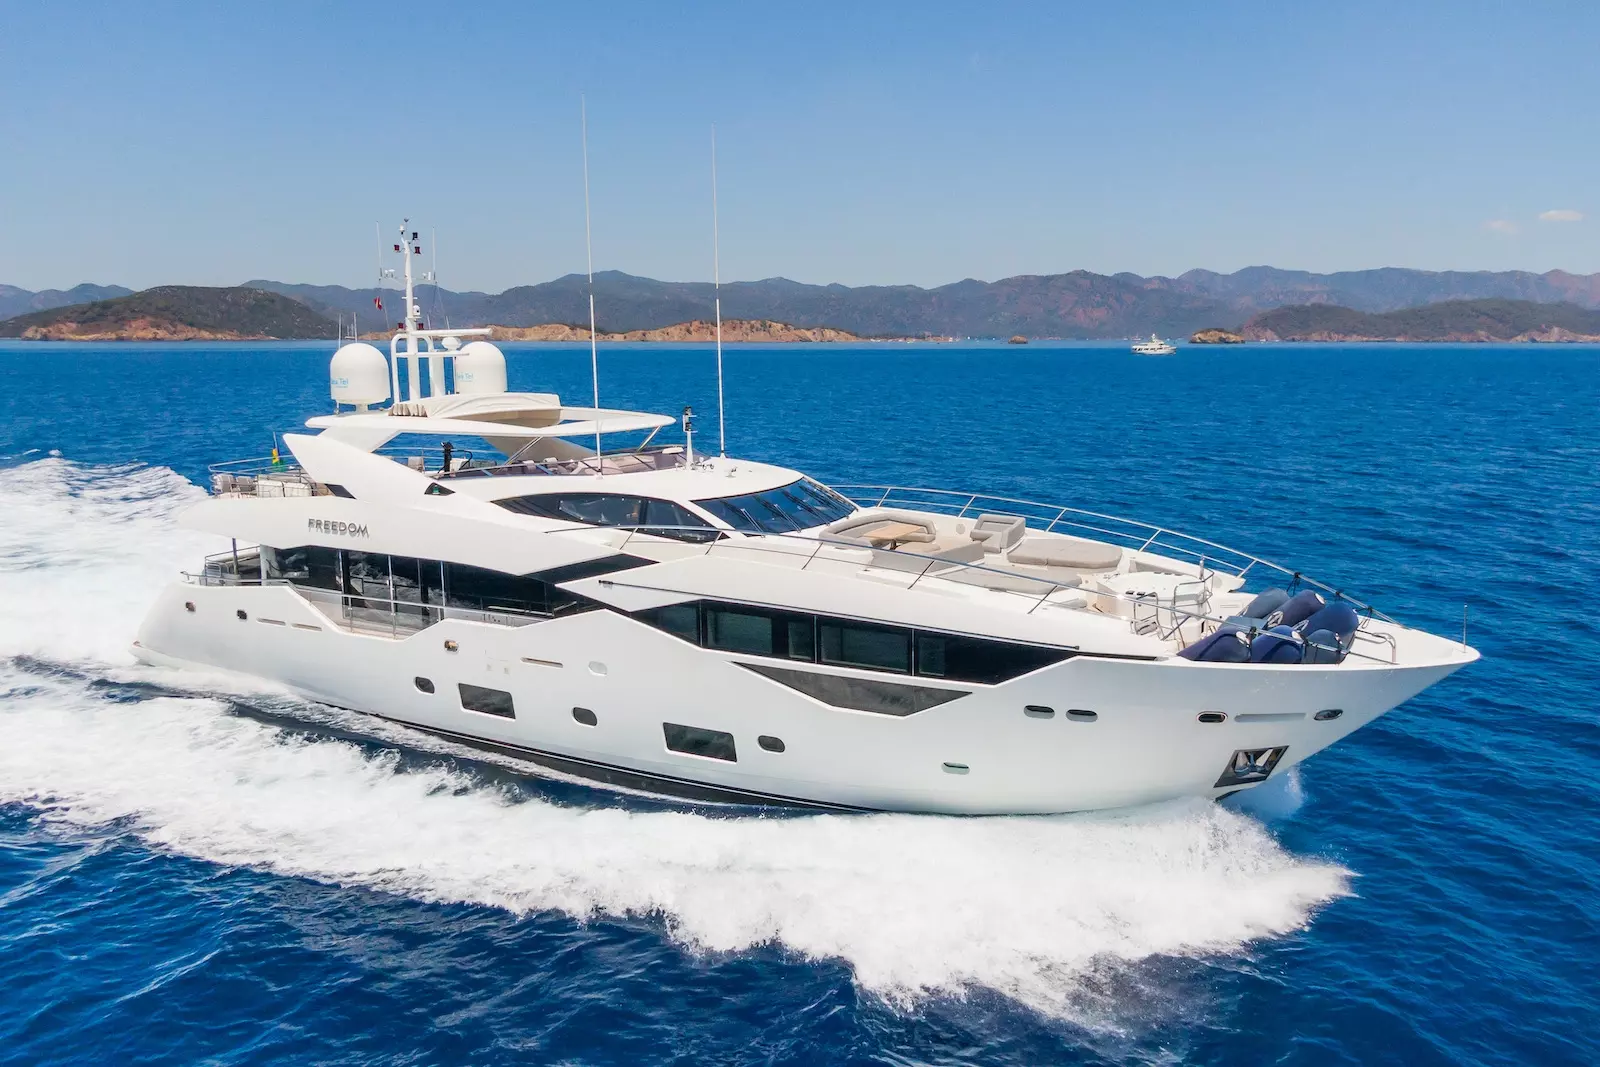 Freedom by Sunseeker - Special Offer for a private Superyacht Charter in Santorini with a crew